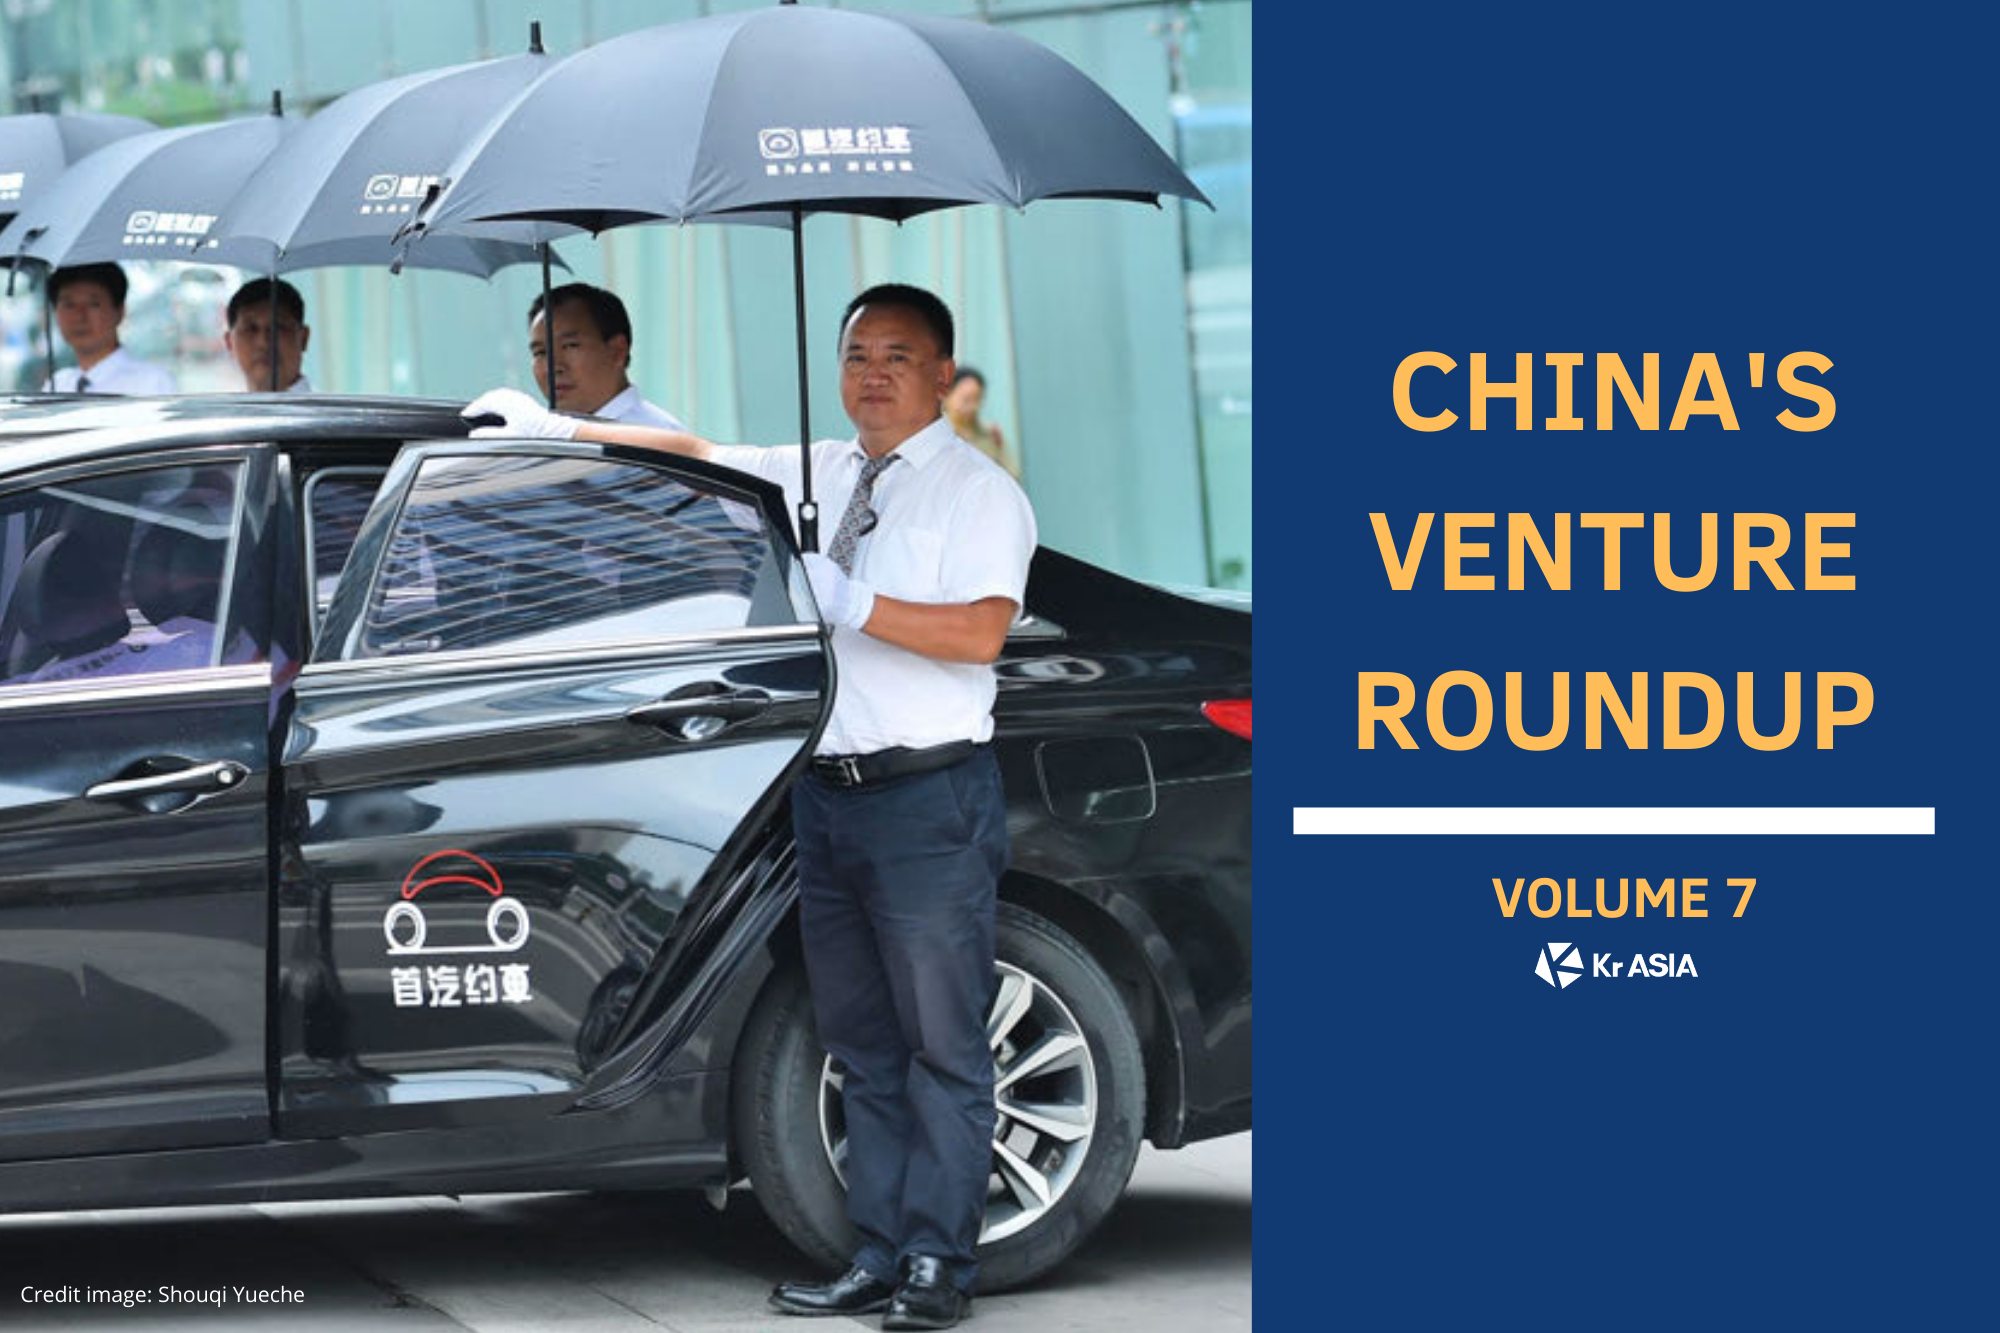 Investments pick up after a sleepy Golden Week | China’s Venture Roundup Volume 7